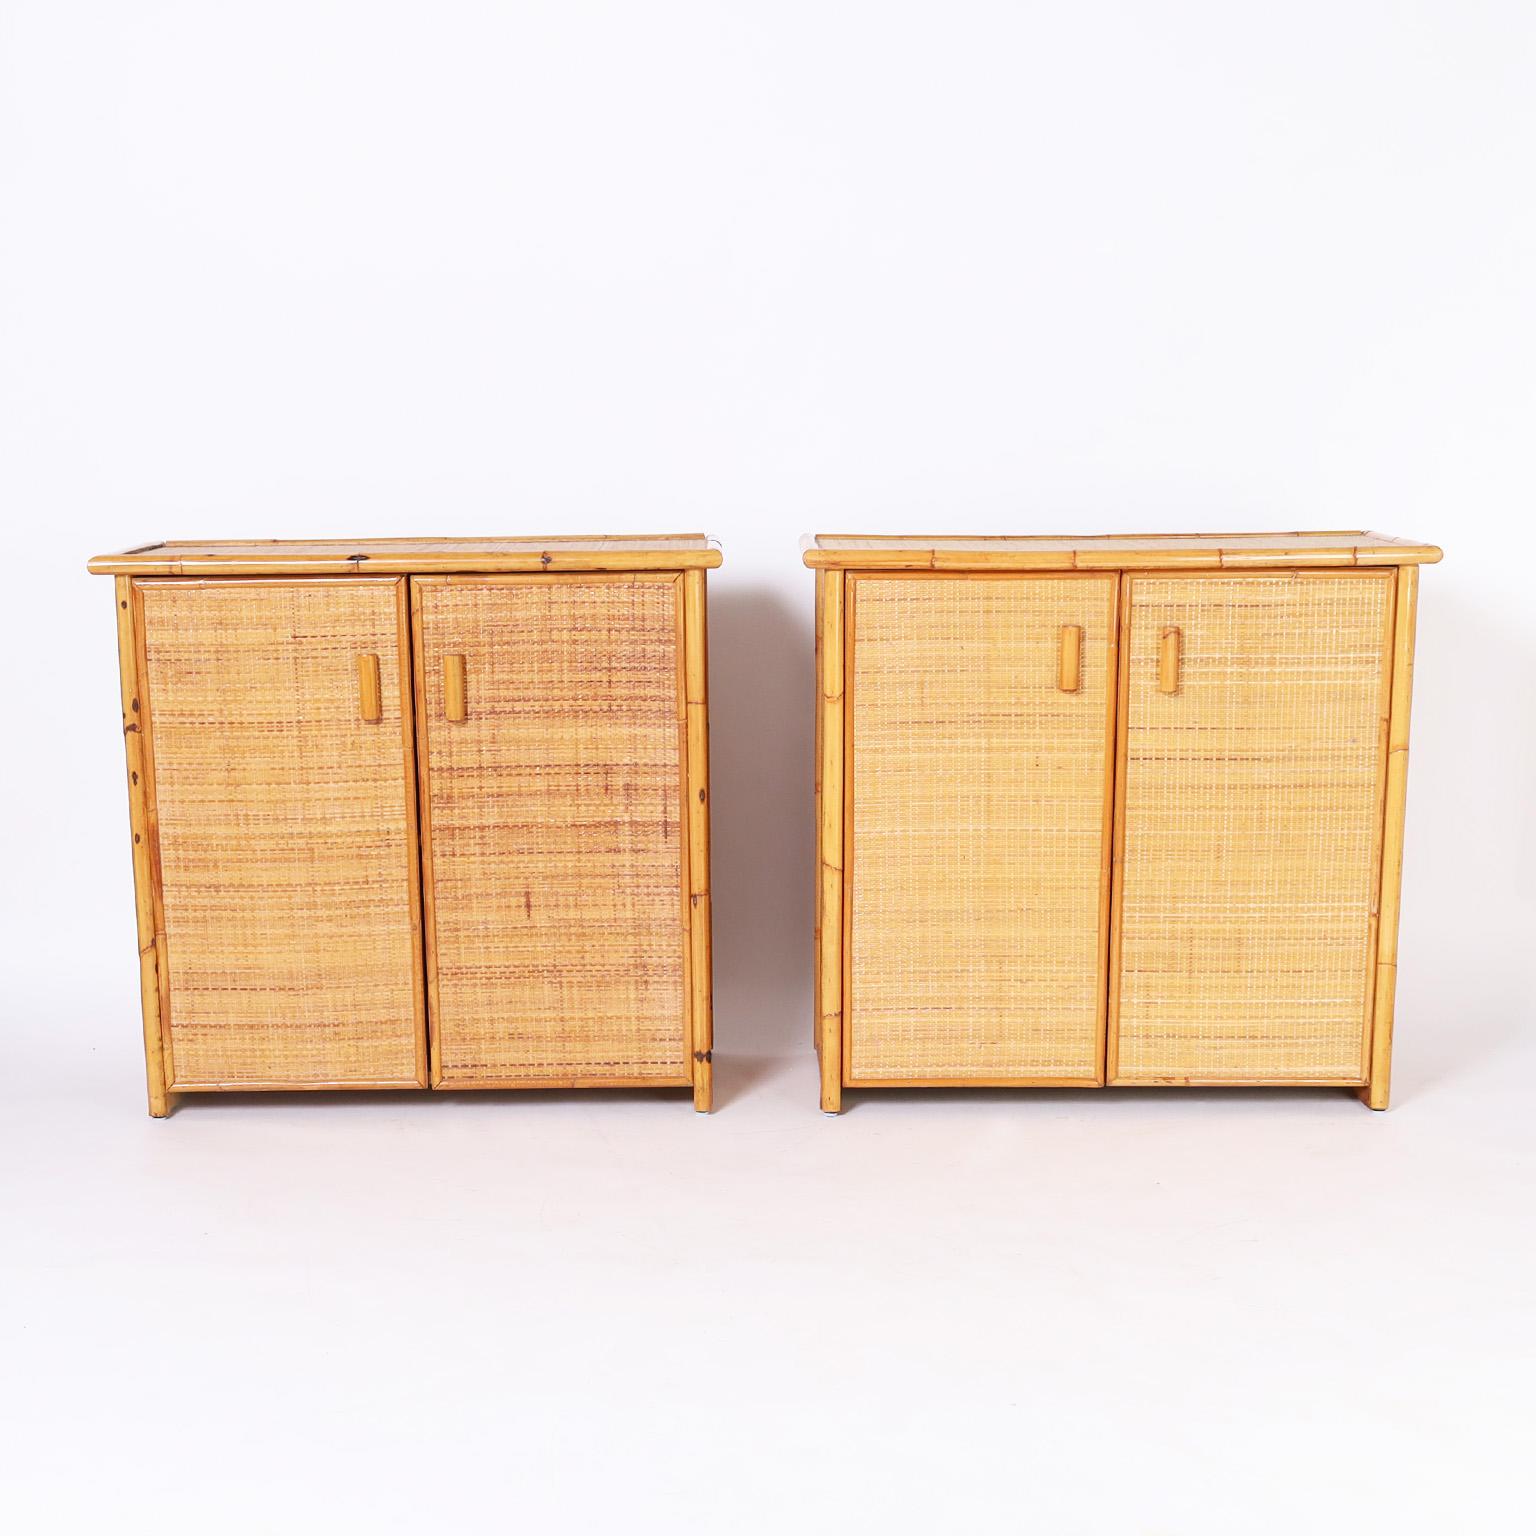 Standout pair of Italian cabinets crafted with bamboo frames and grasscloth panels all around in a sleek modern form with two doors and plenty of storage inside.